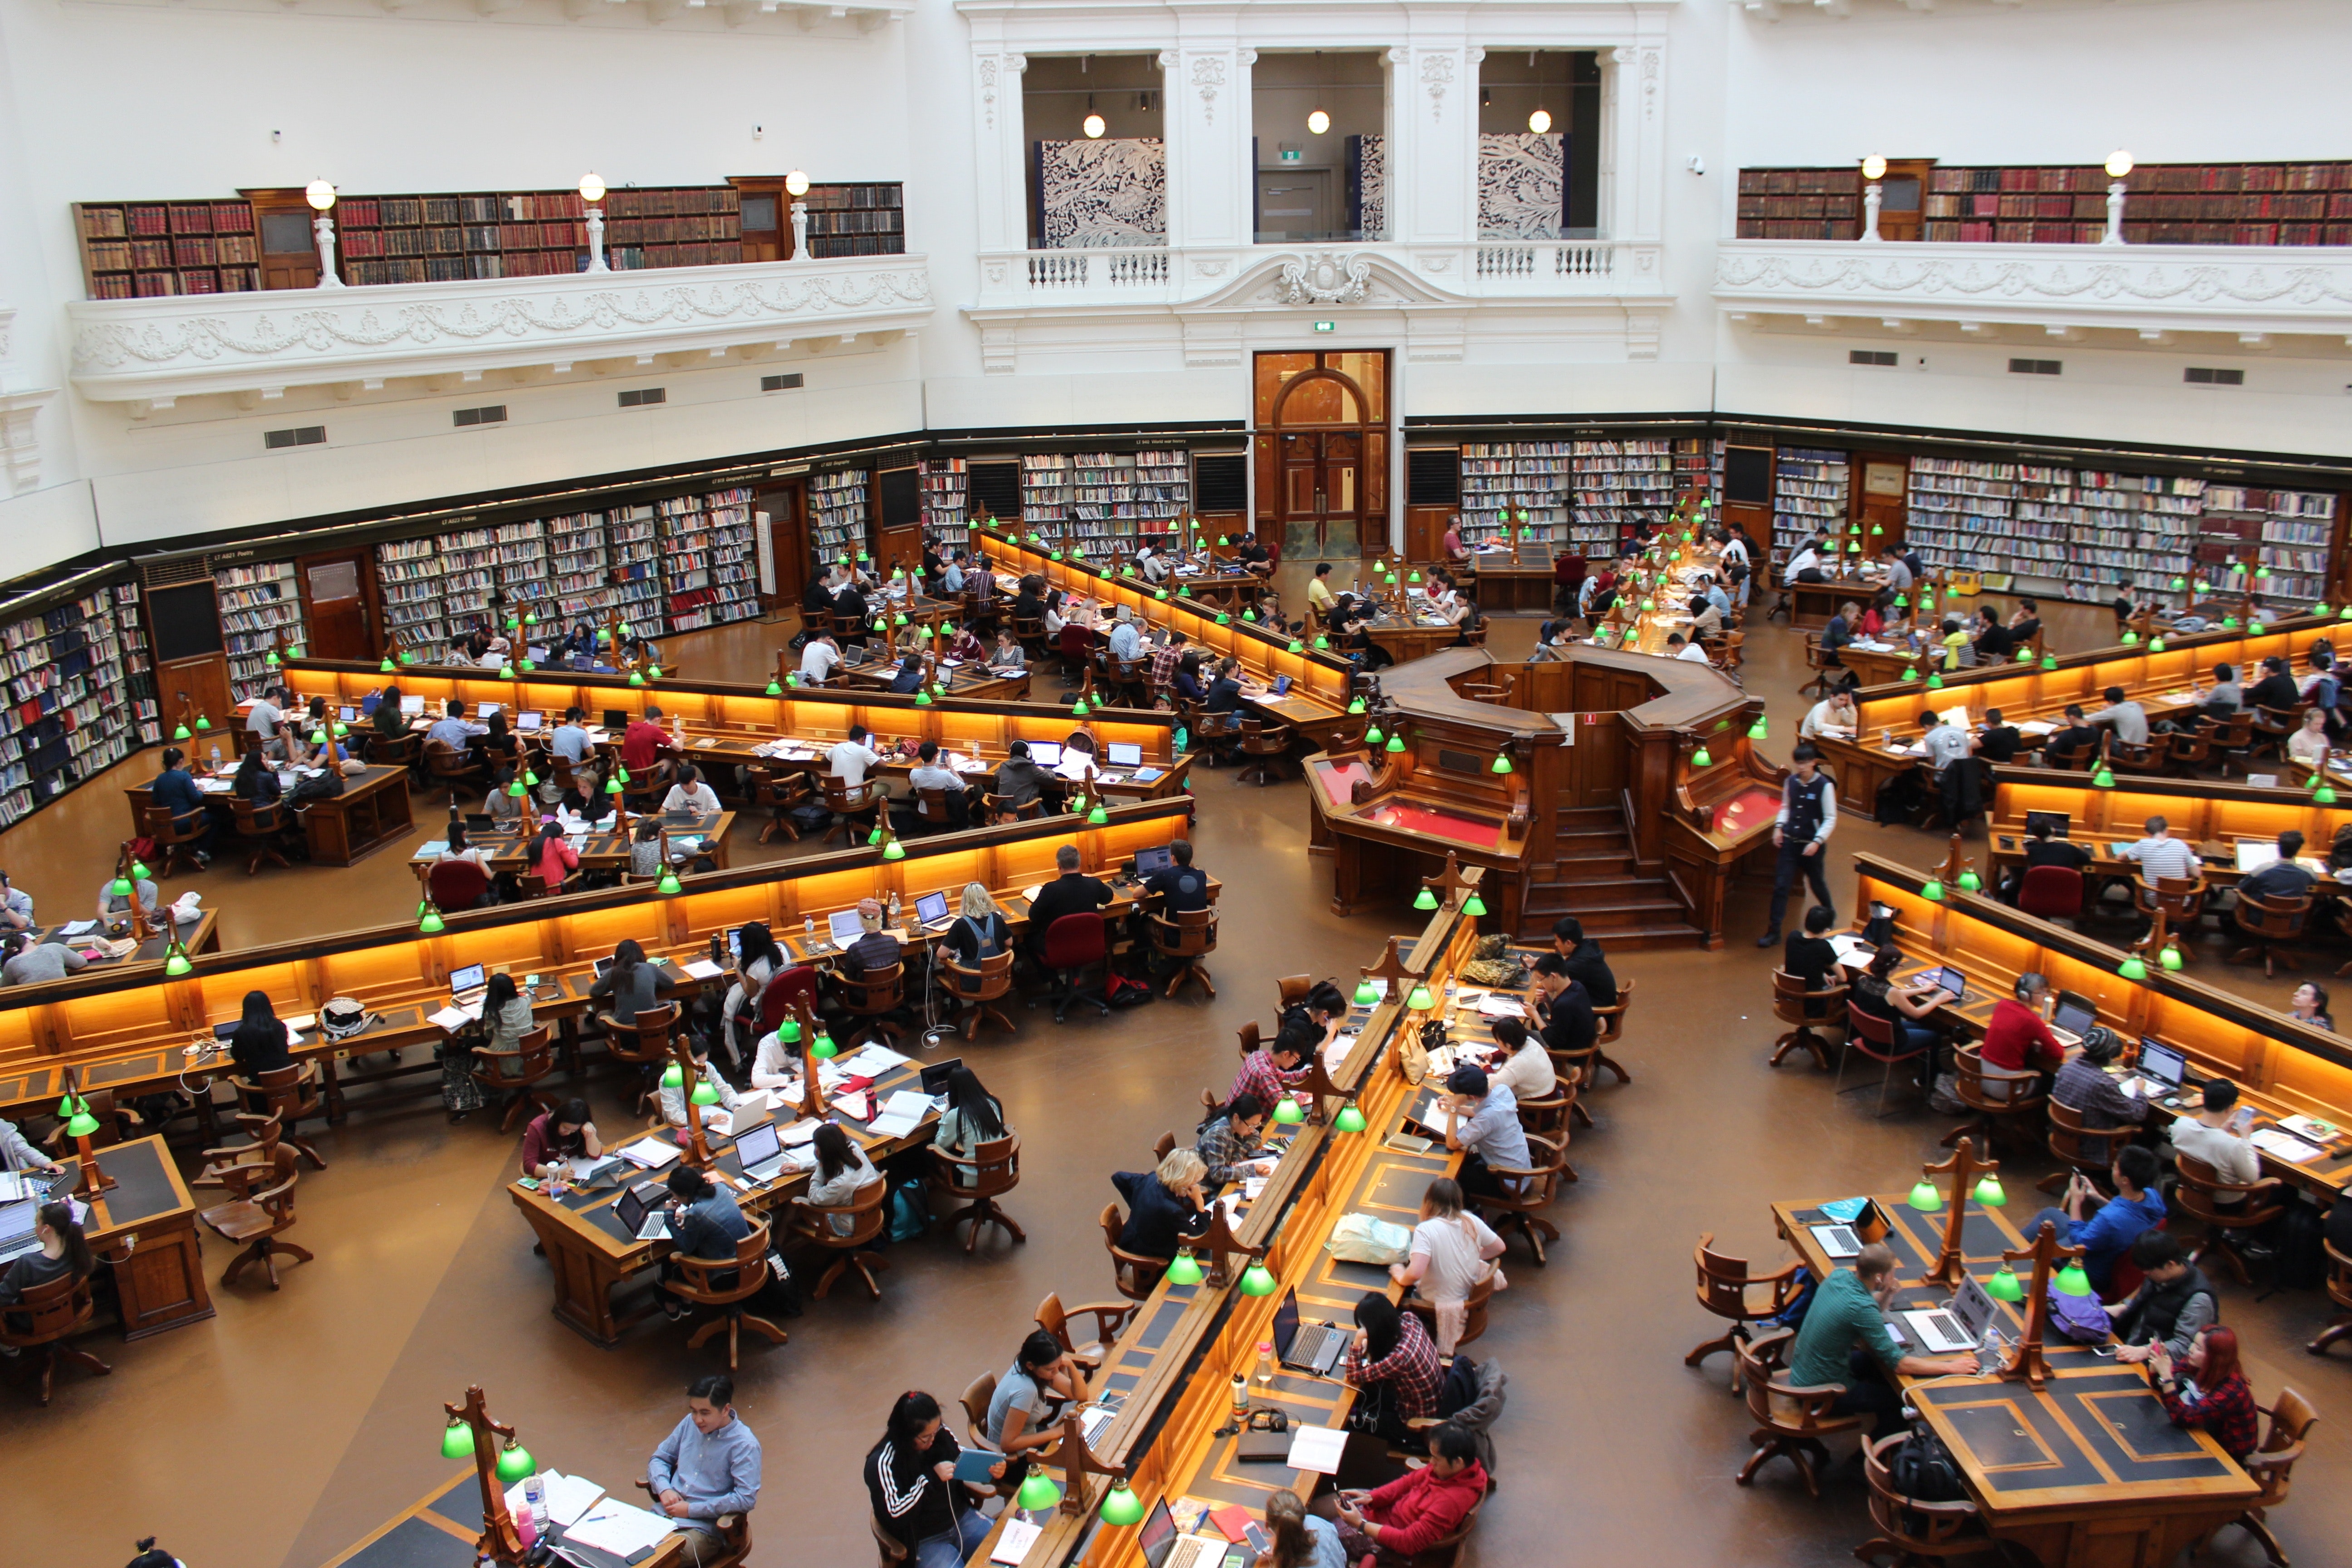 People Sitting Inside Well Lit Room, Academic, Library, Tables, Studying, HQ Photo